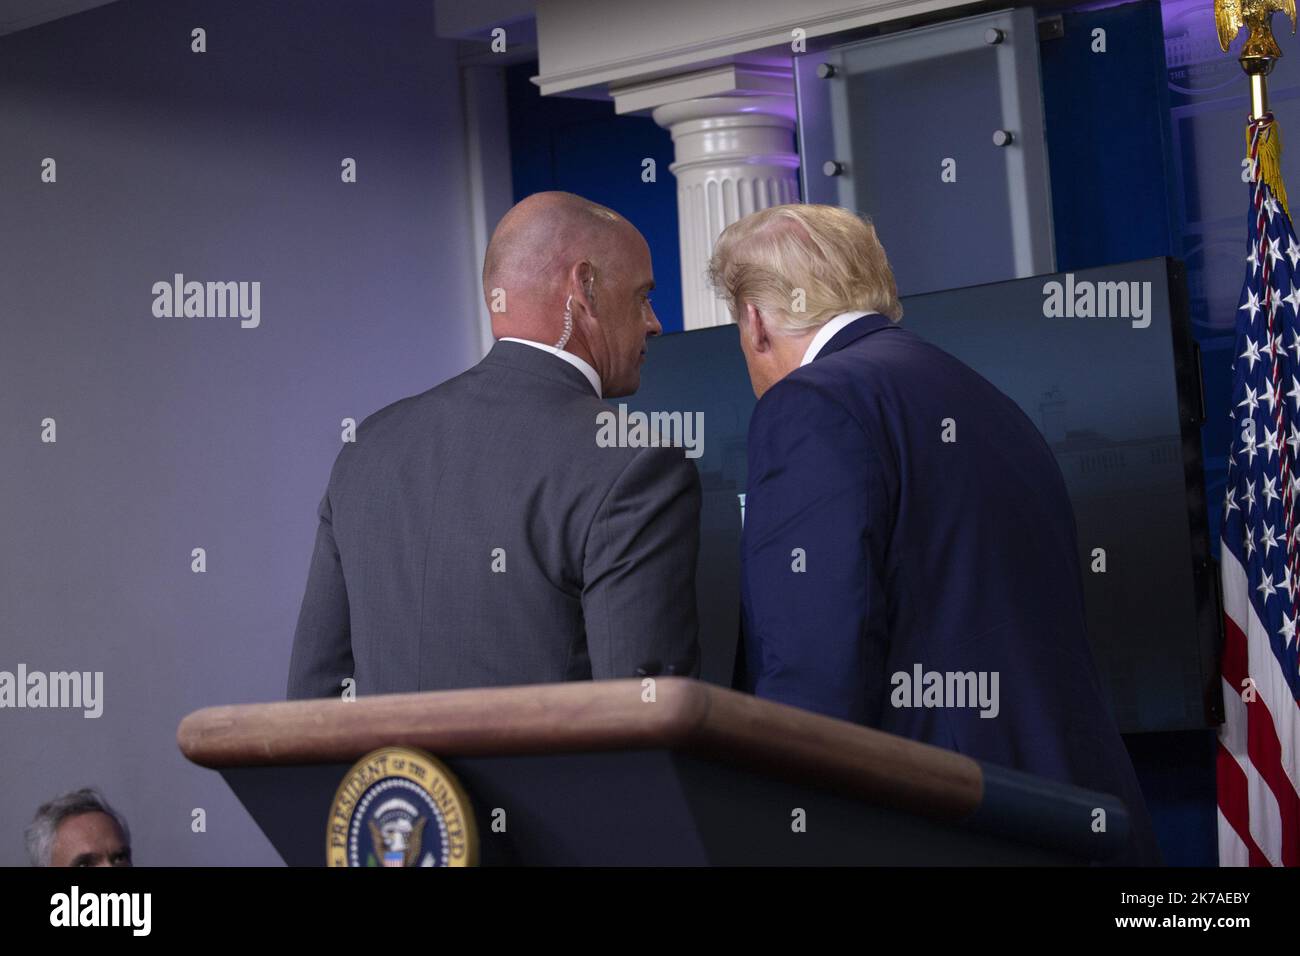 STEFANIE REYNOLDS/UPI/MAXPPP - President Donald Trump is removed from the White House Briefing Room by a US Secret Service agent during a press conference in Washington, DC on Monday, August 10, 2020. Photo by Stefani Reynolds/UPI Stock Photo